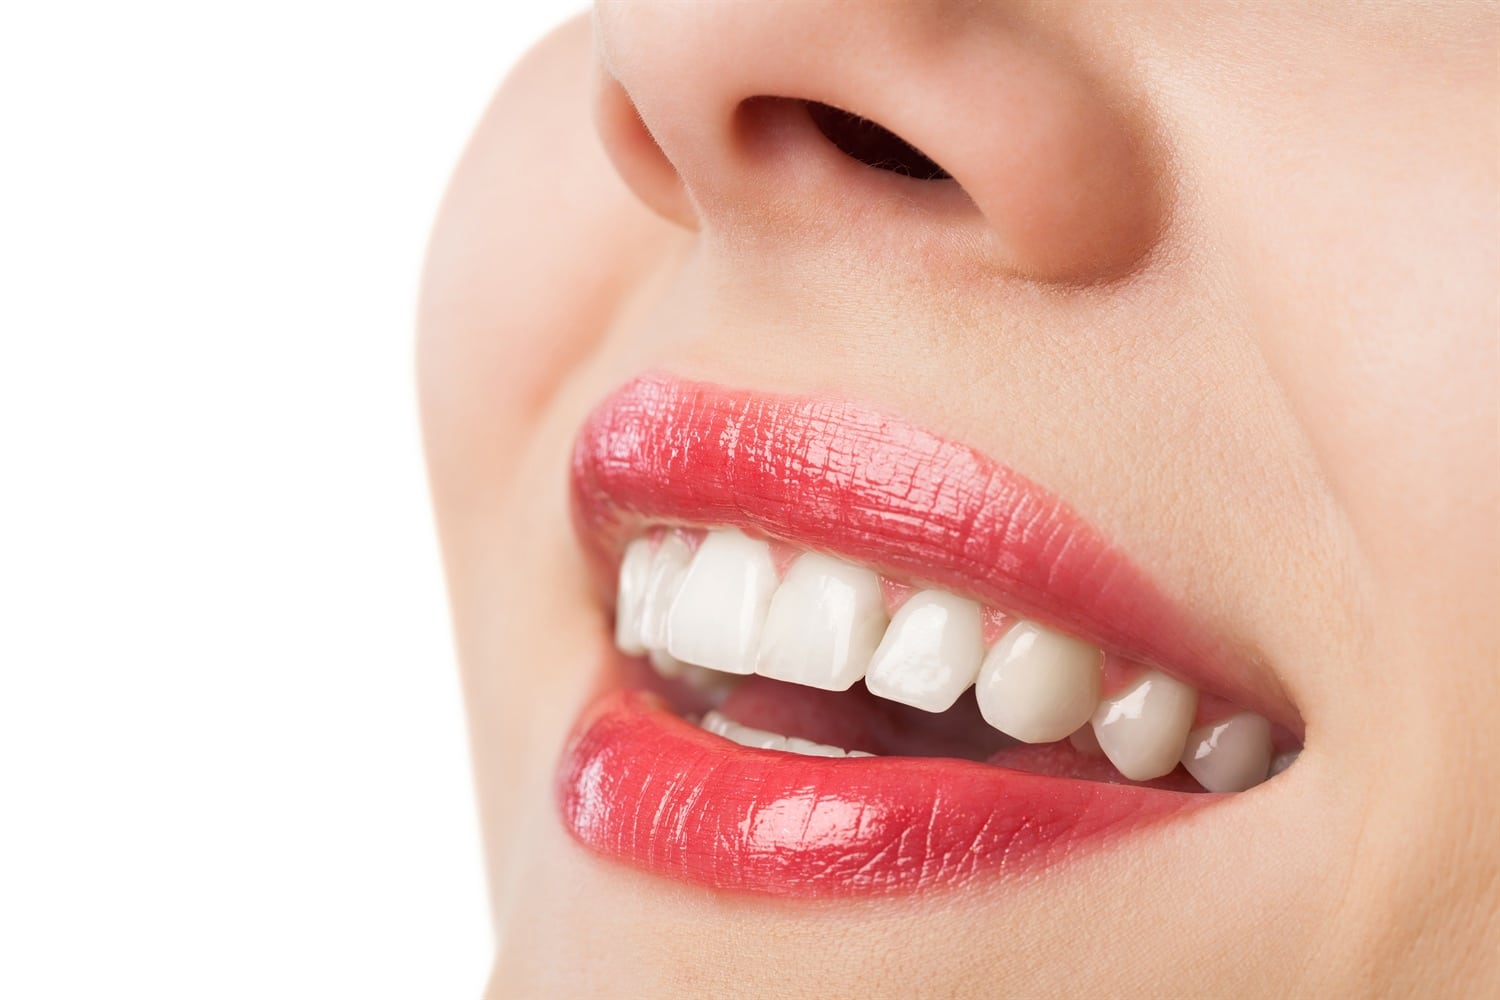 Smile Makeover in Thailand - Get 50% off Teeth Whitening